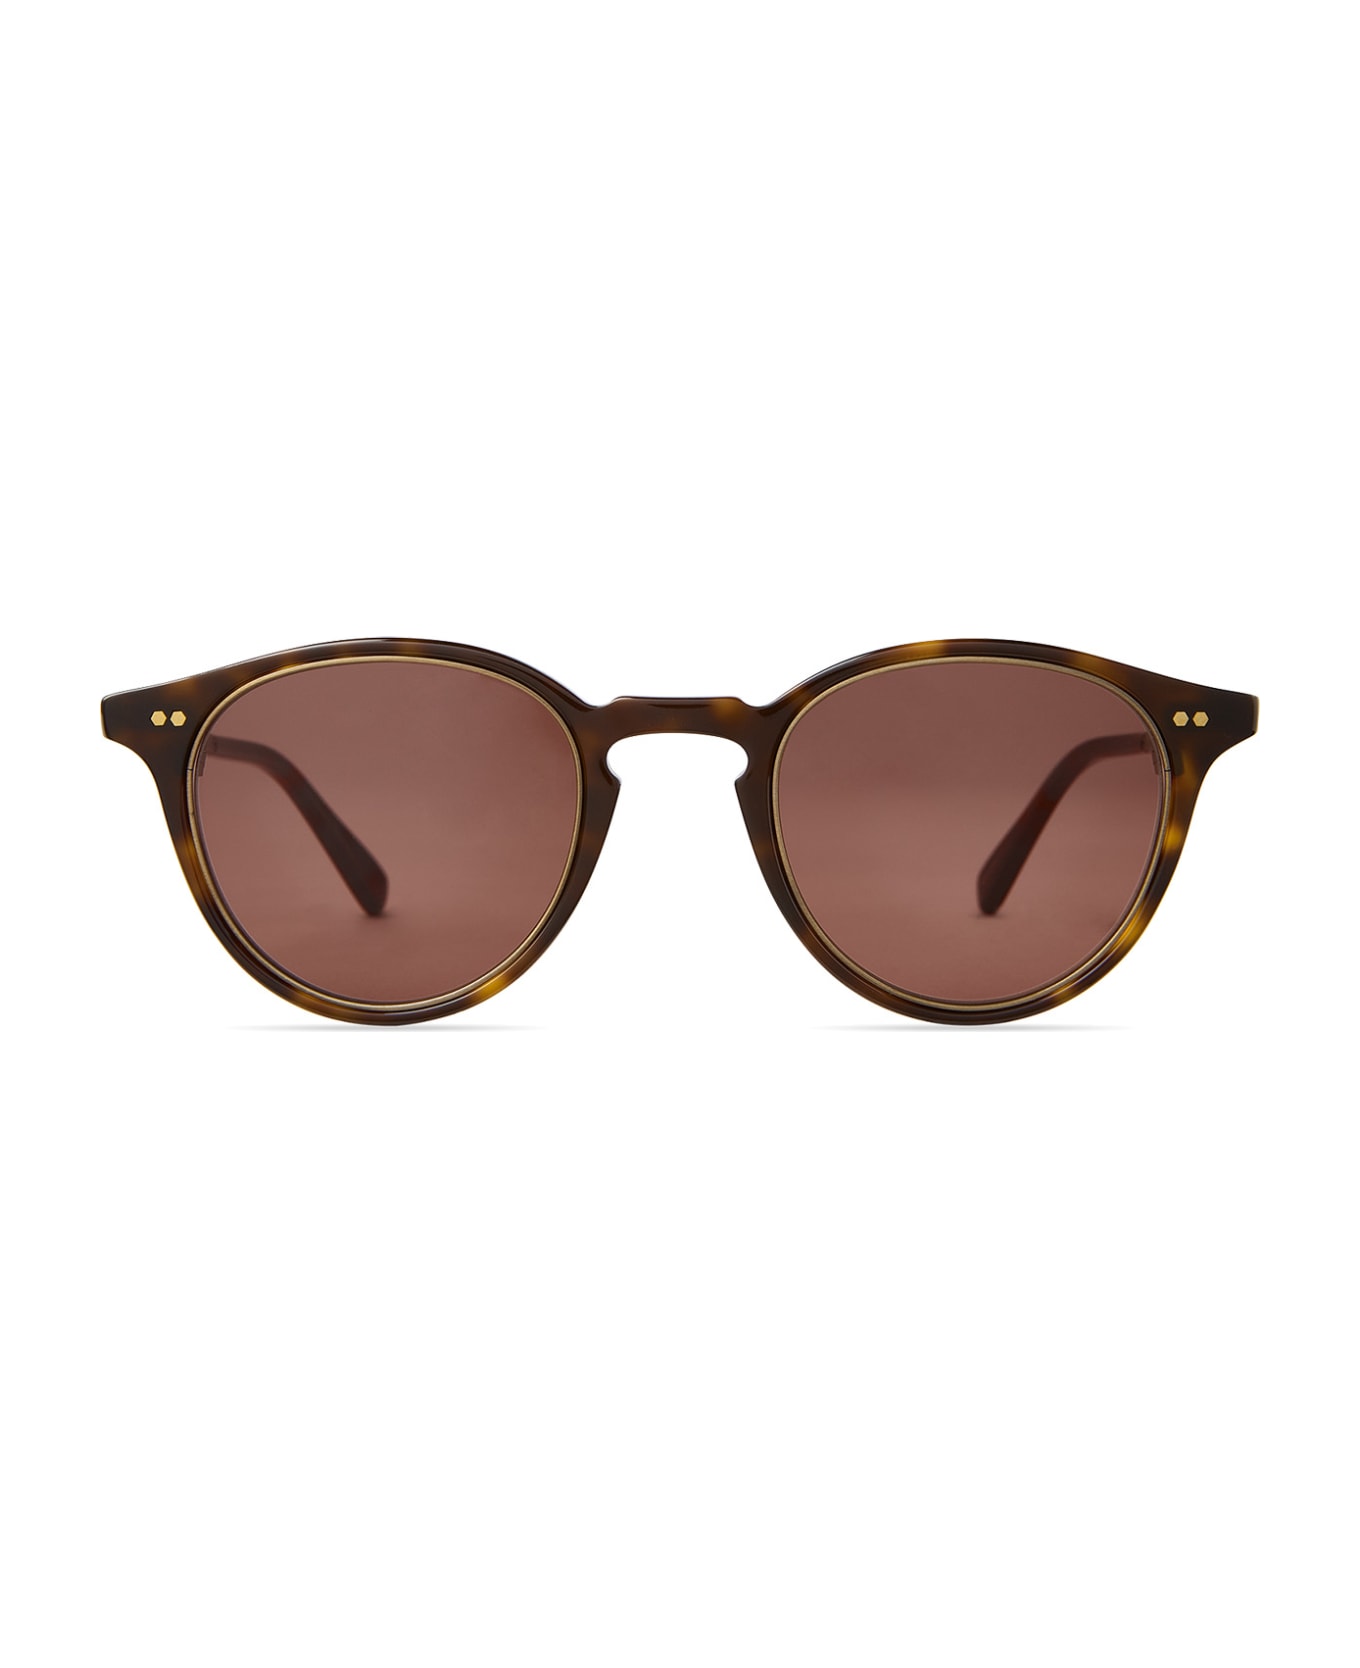 Mr. Leight Marmont Ii S Hickory Tortoise-antique Gold Sunglasses - Hickory Tortoise-Antique Gold